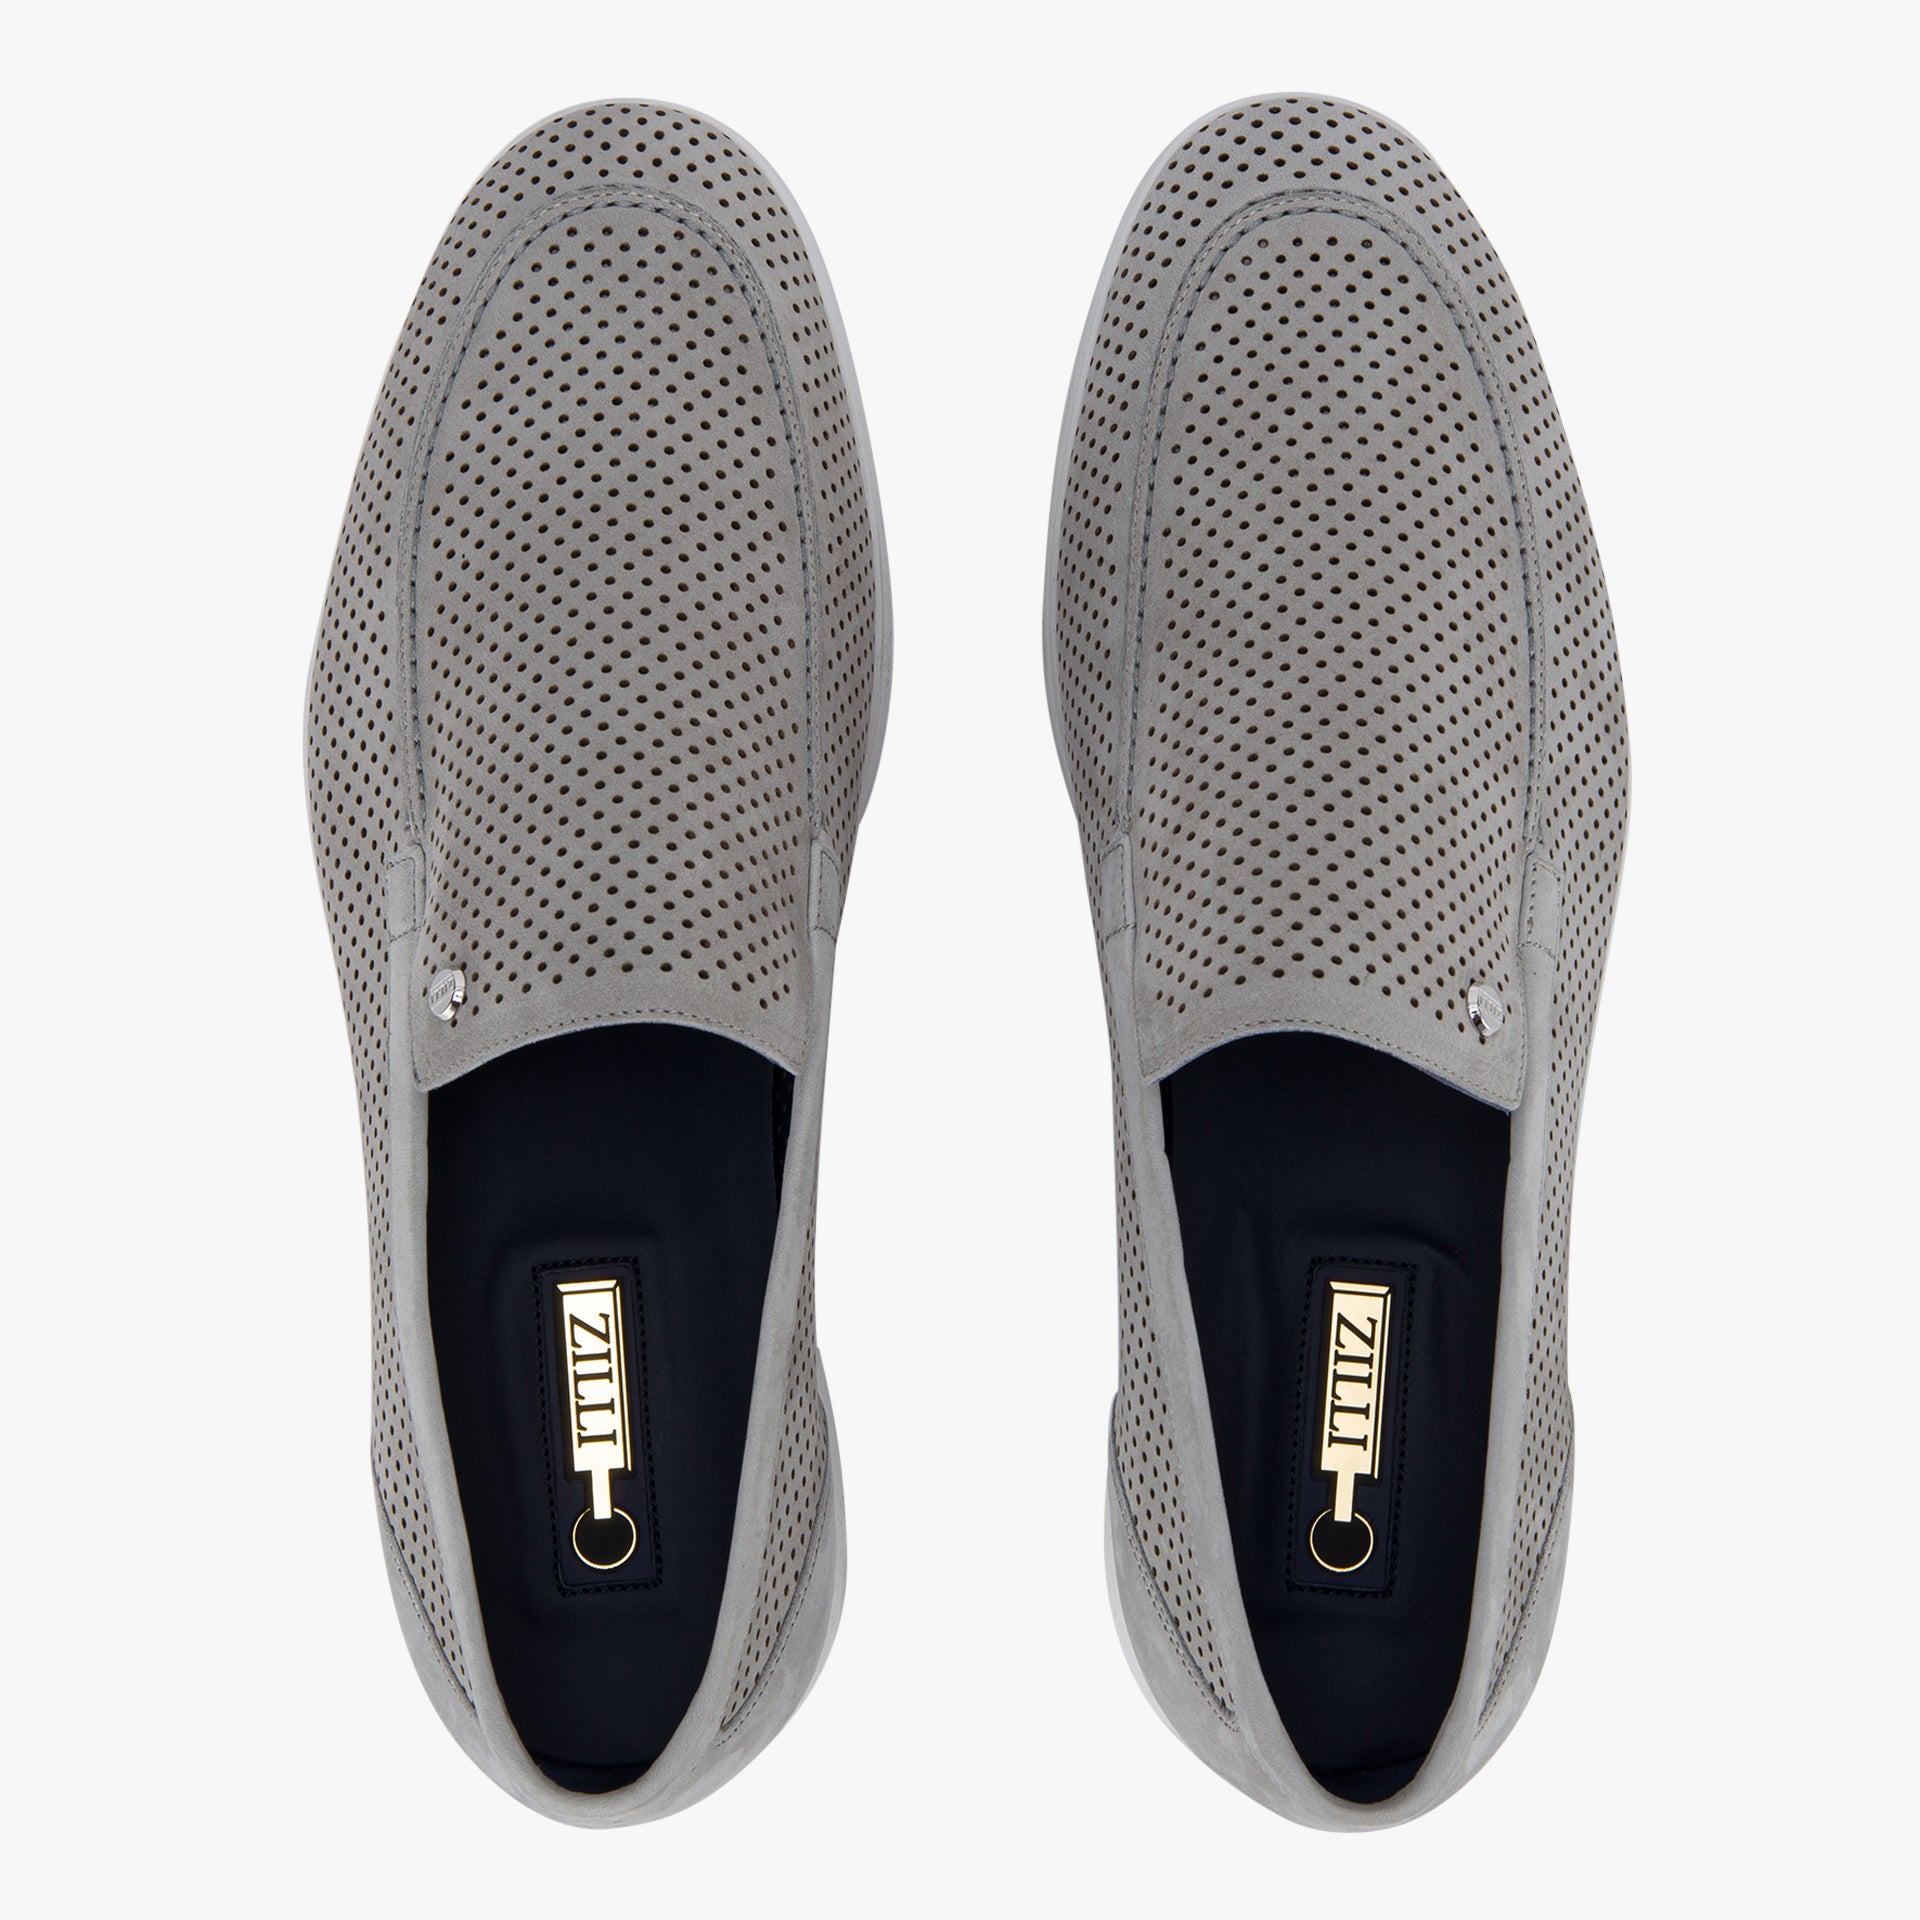 Perforated Suede Calfskin Moccassin